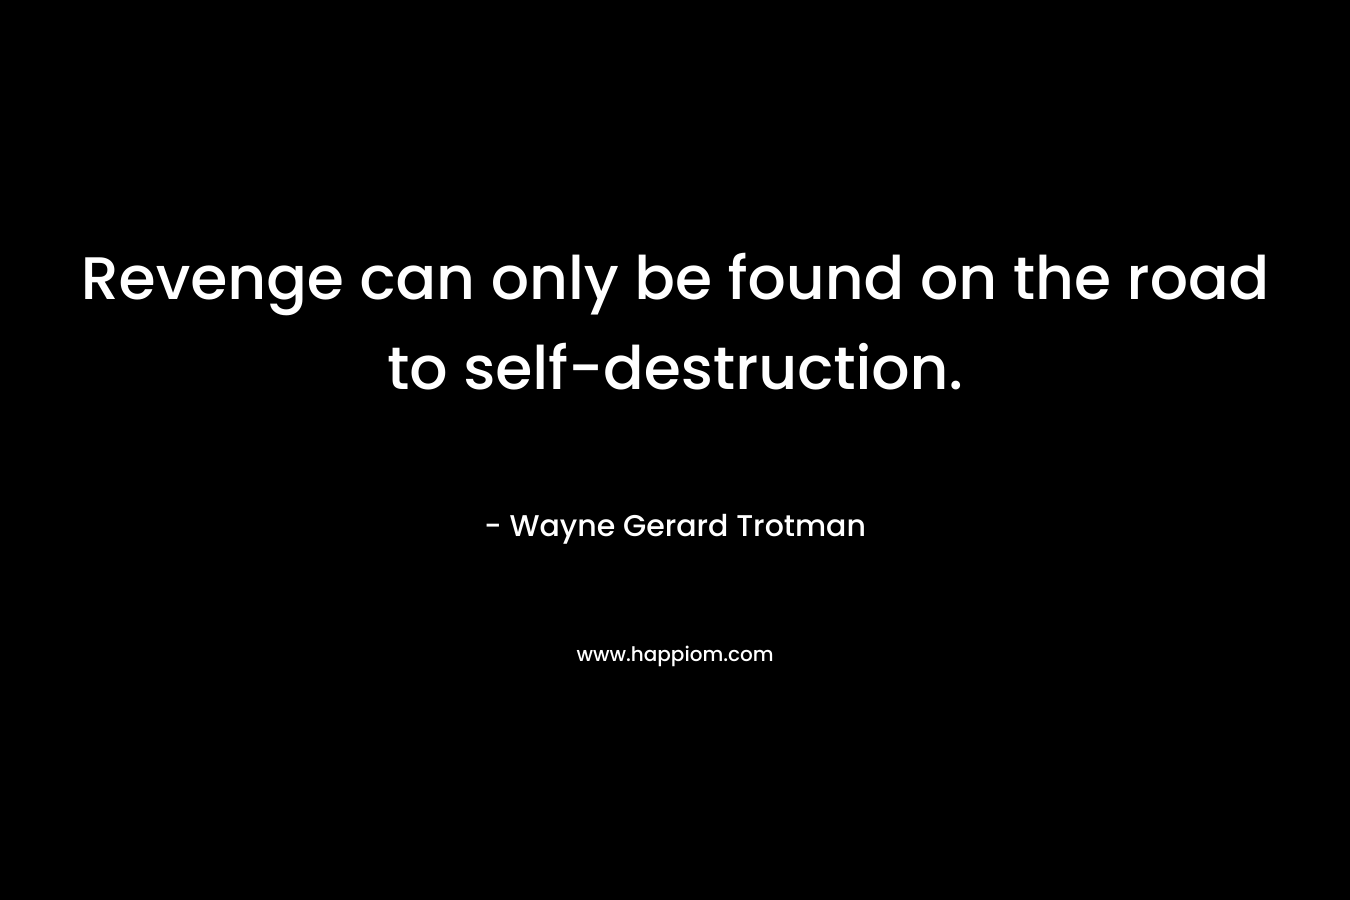 Revenge can only be found on the road to self-destruction. – Wayne Gerard Trotman